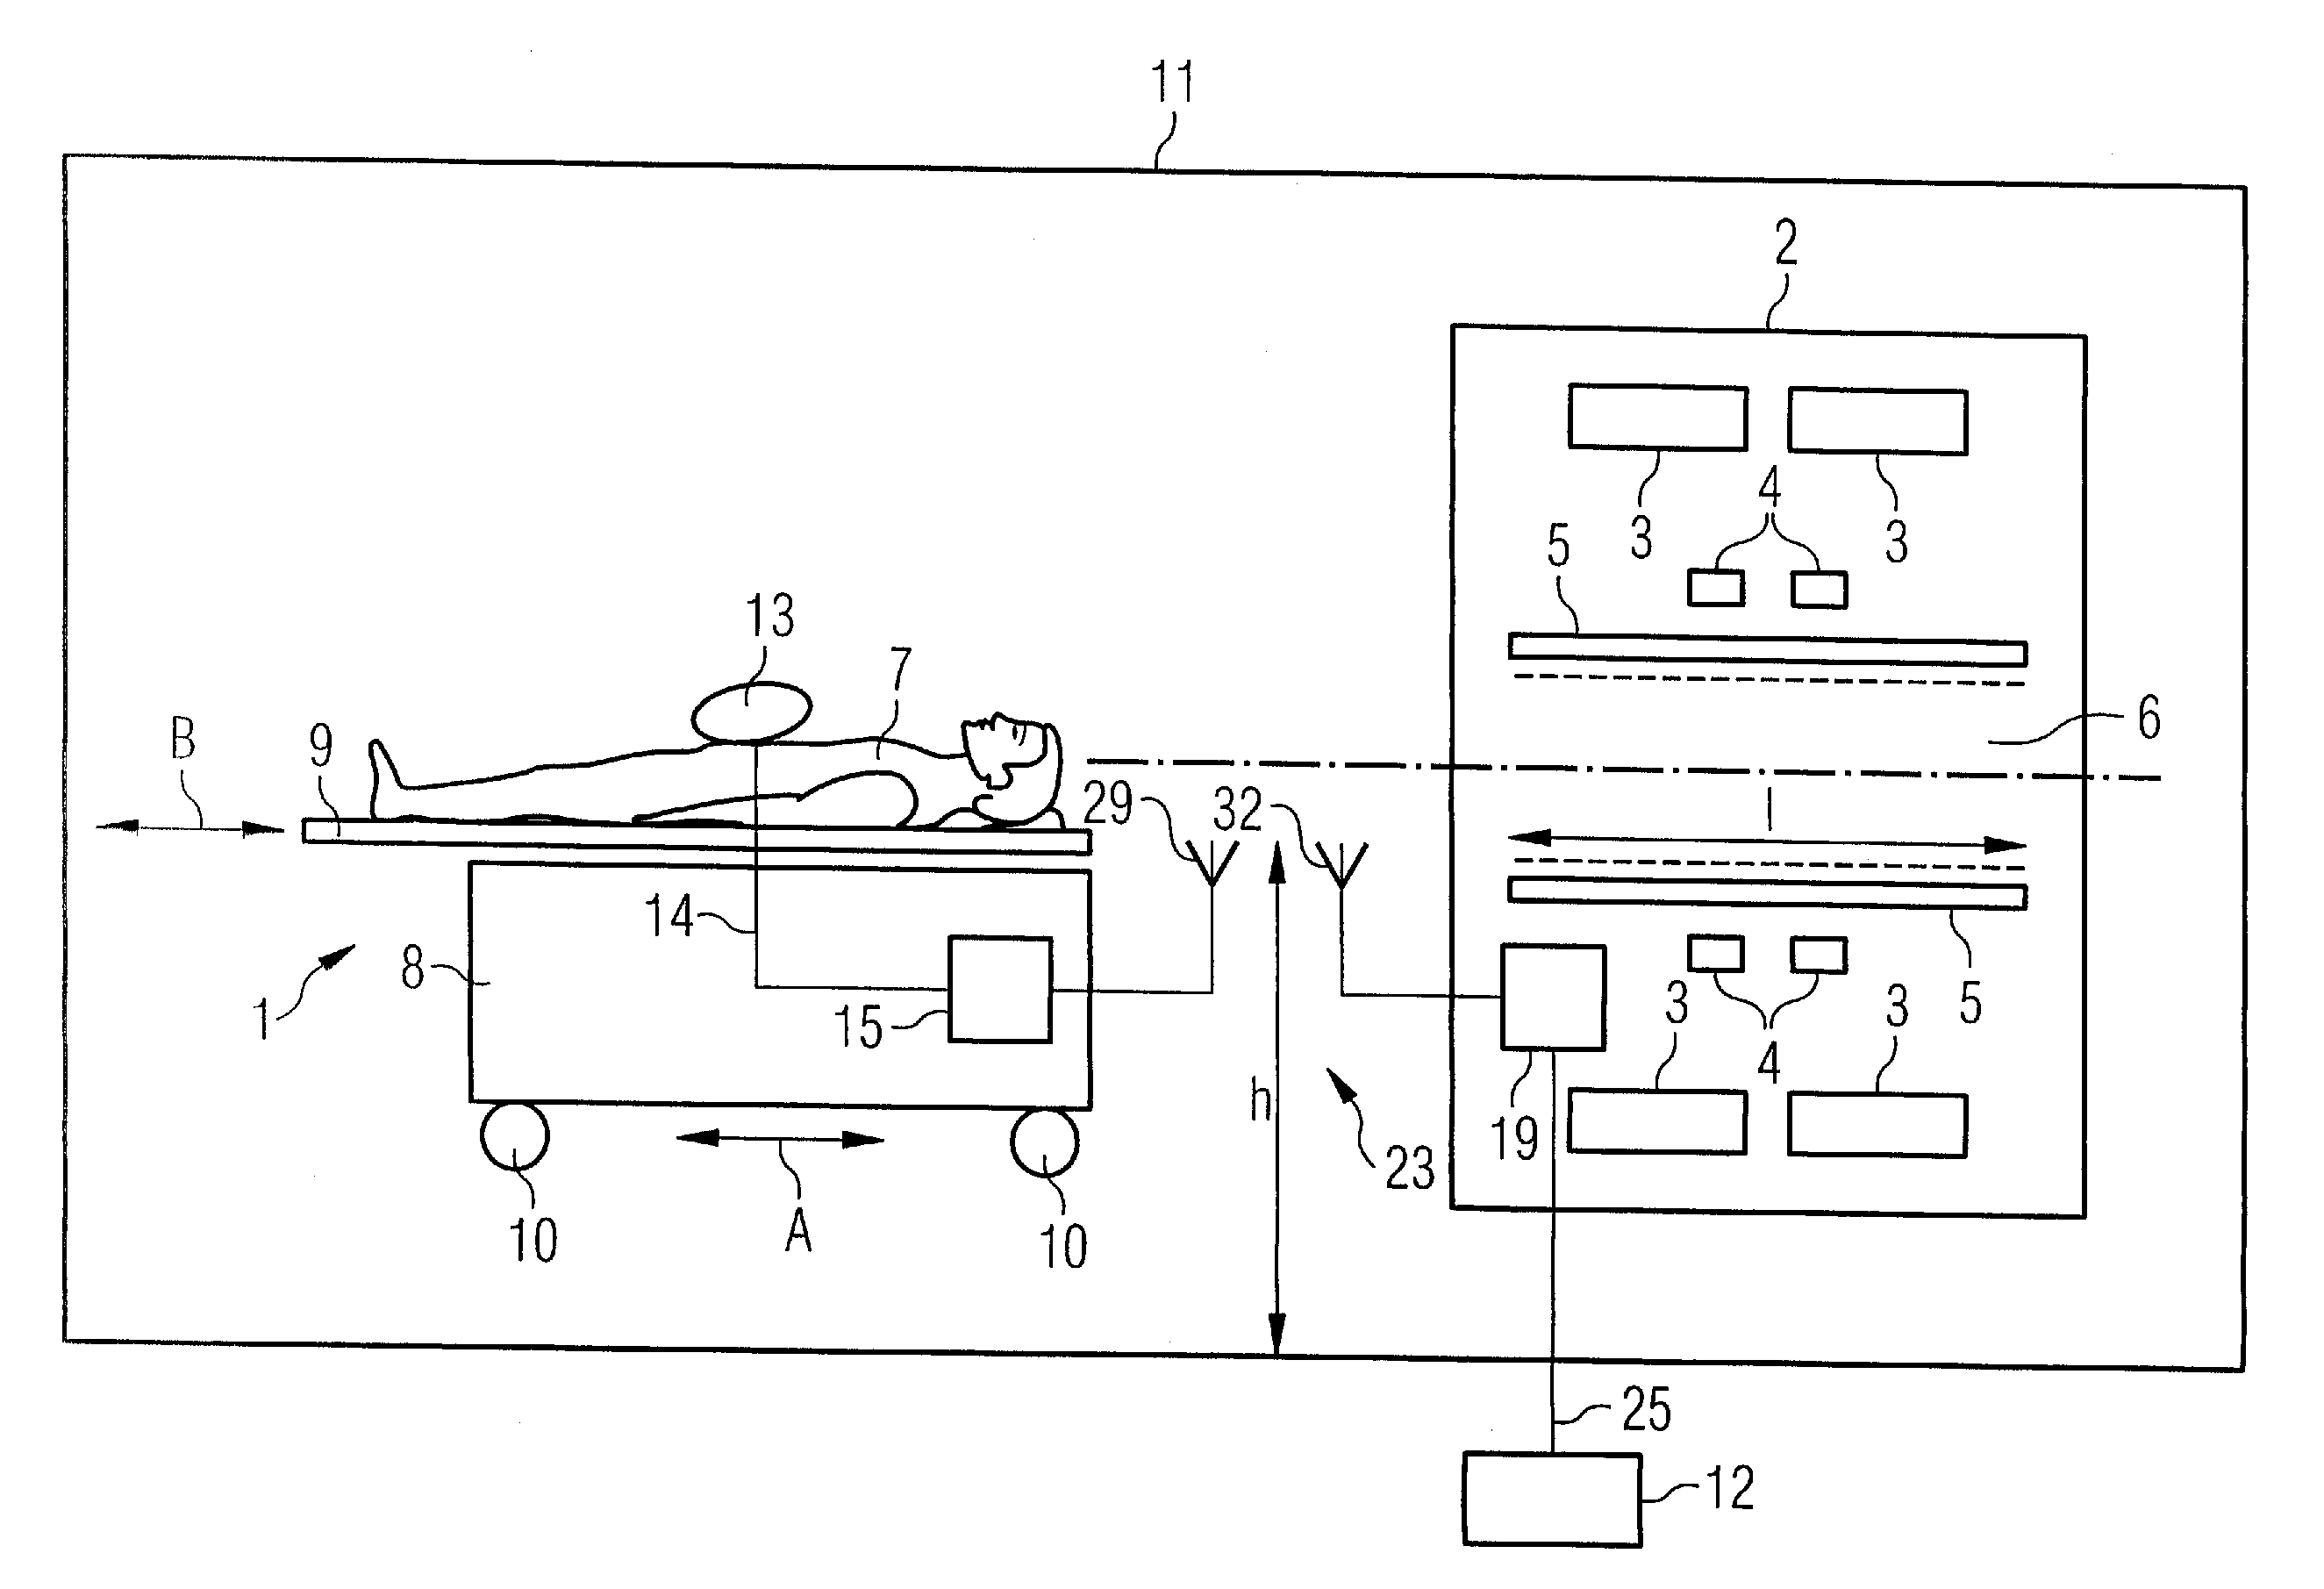 Magnetic resonance system with transmission of a digitized magnetic resonance signal across an air gap